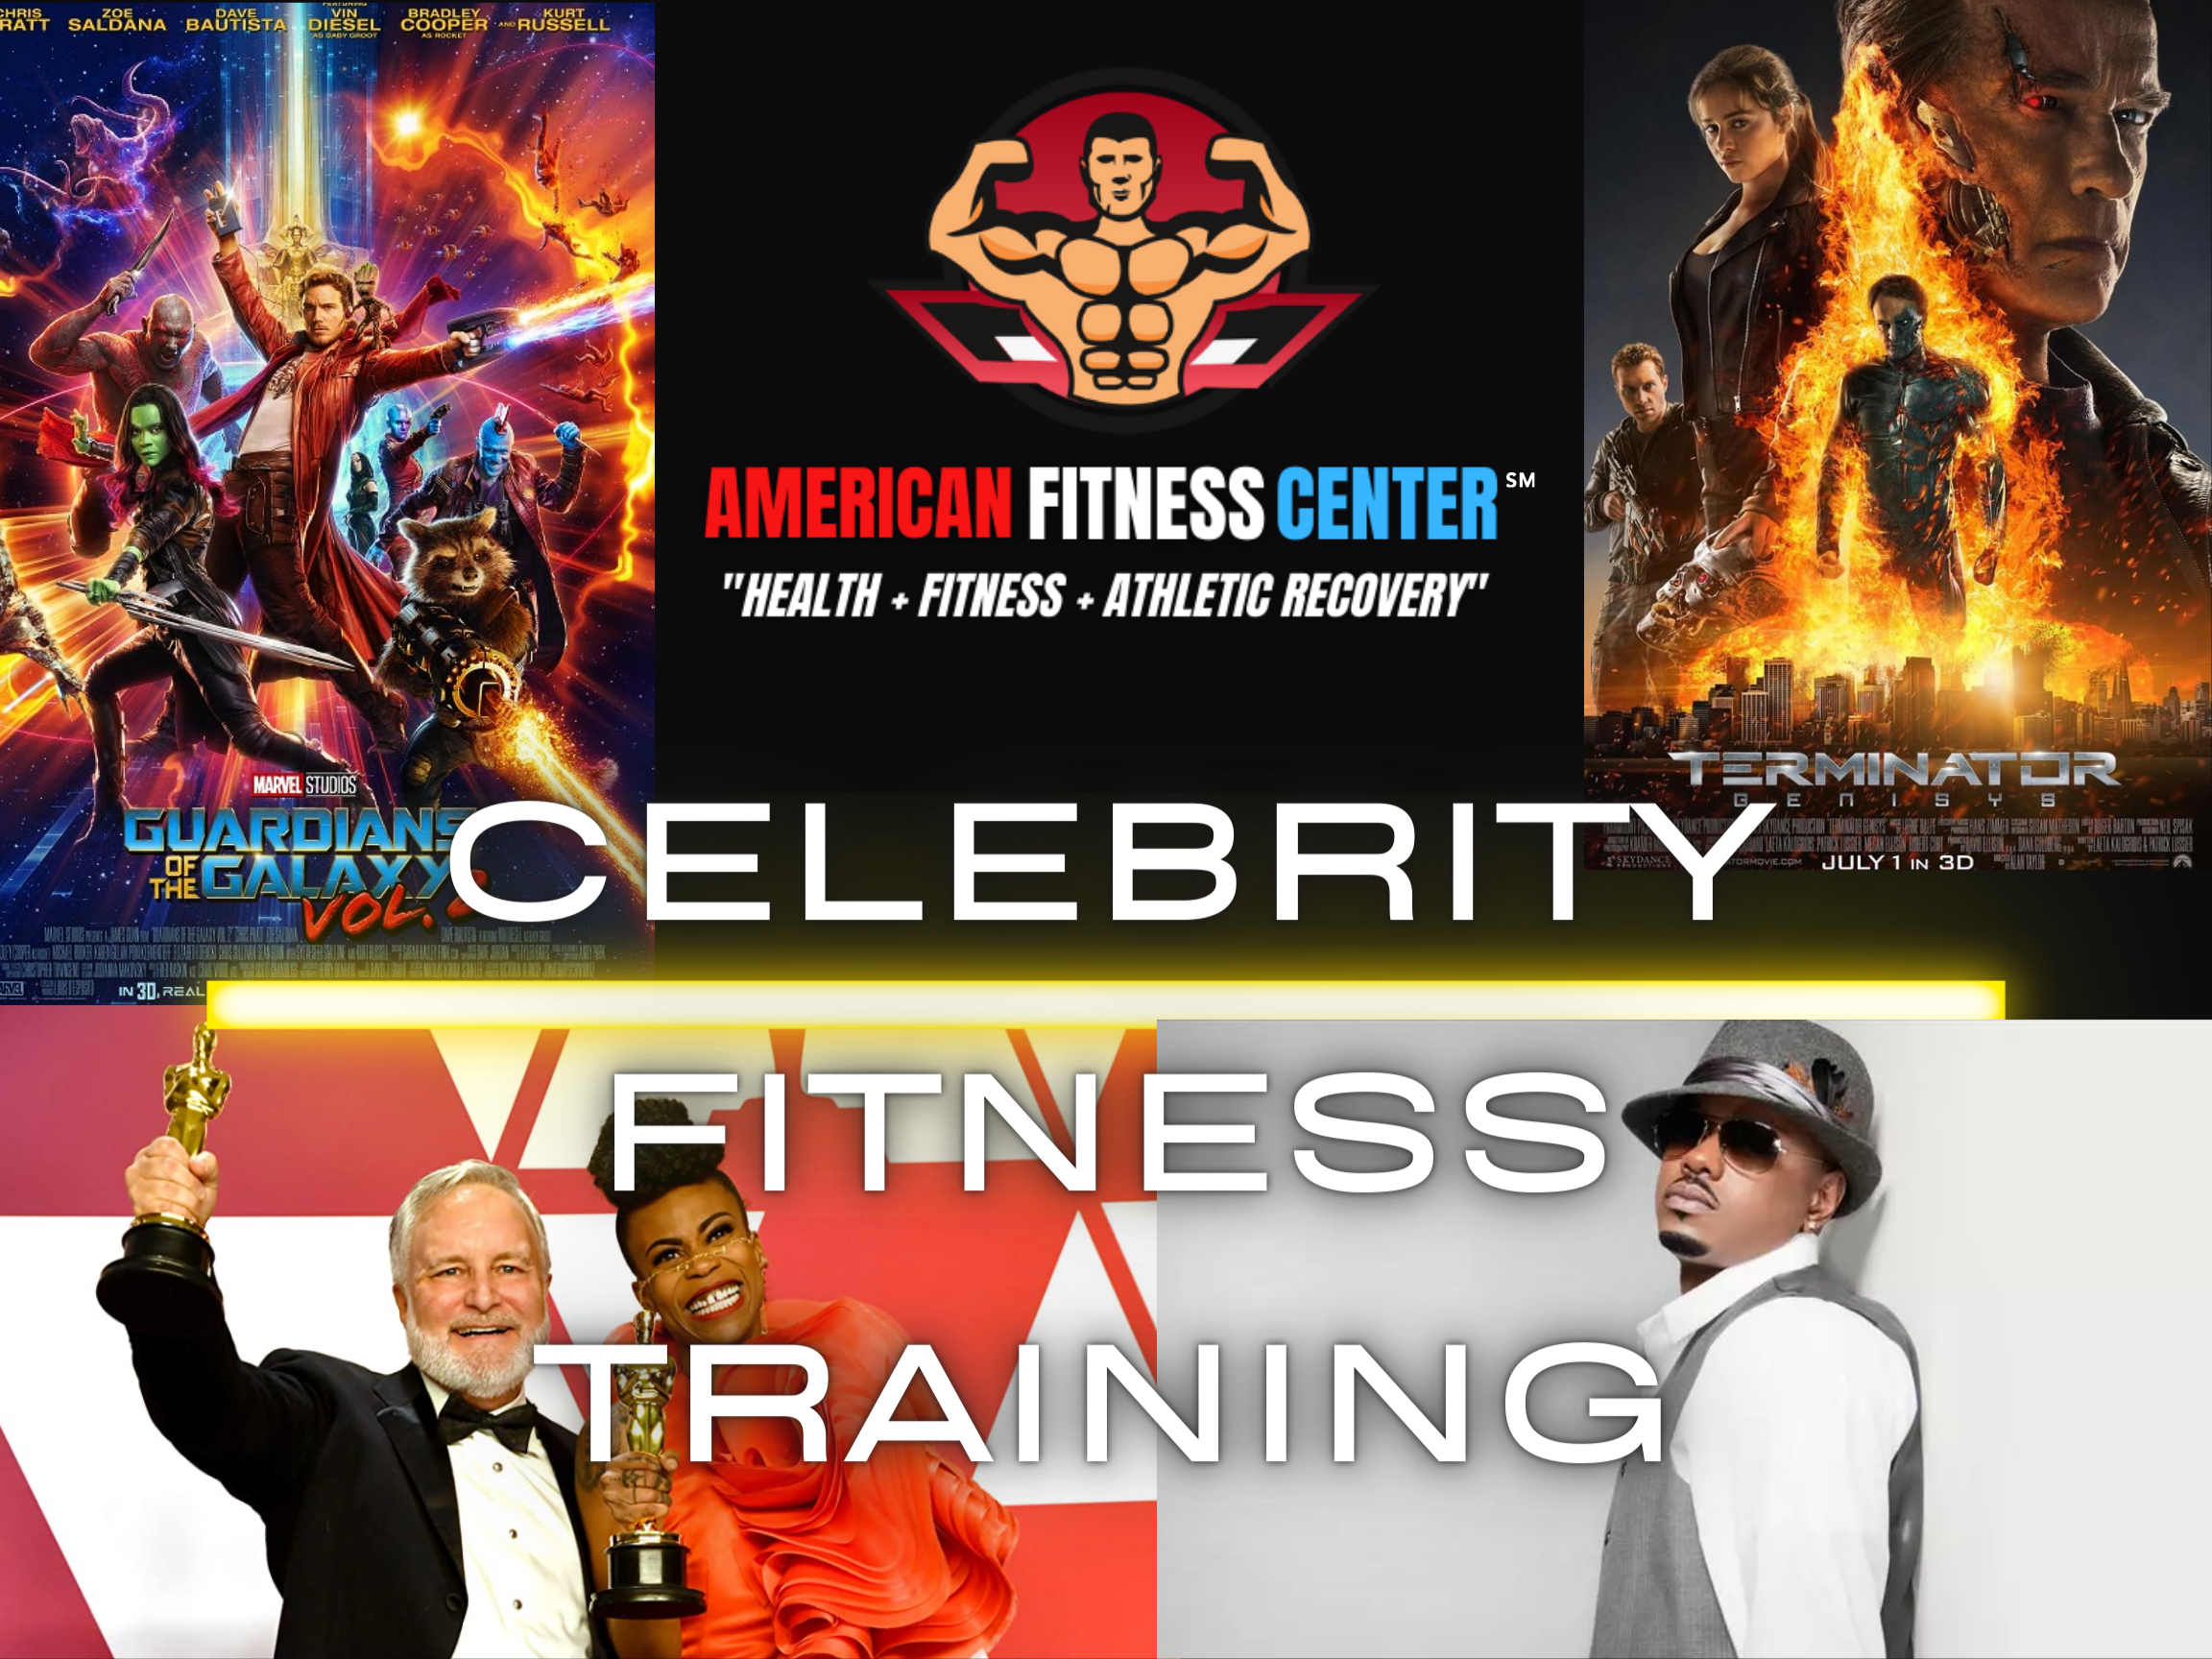 Celebrity-Fitness-Training-in-Peachtree-City-GA-American-Fitness-Center-Peachtree-City